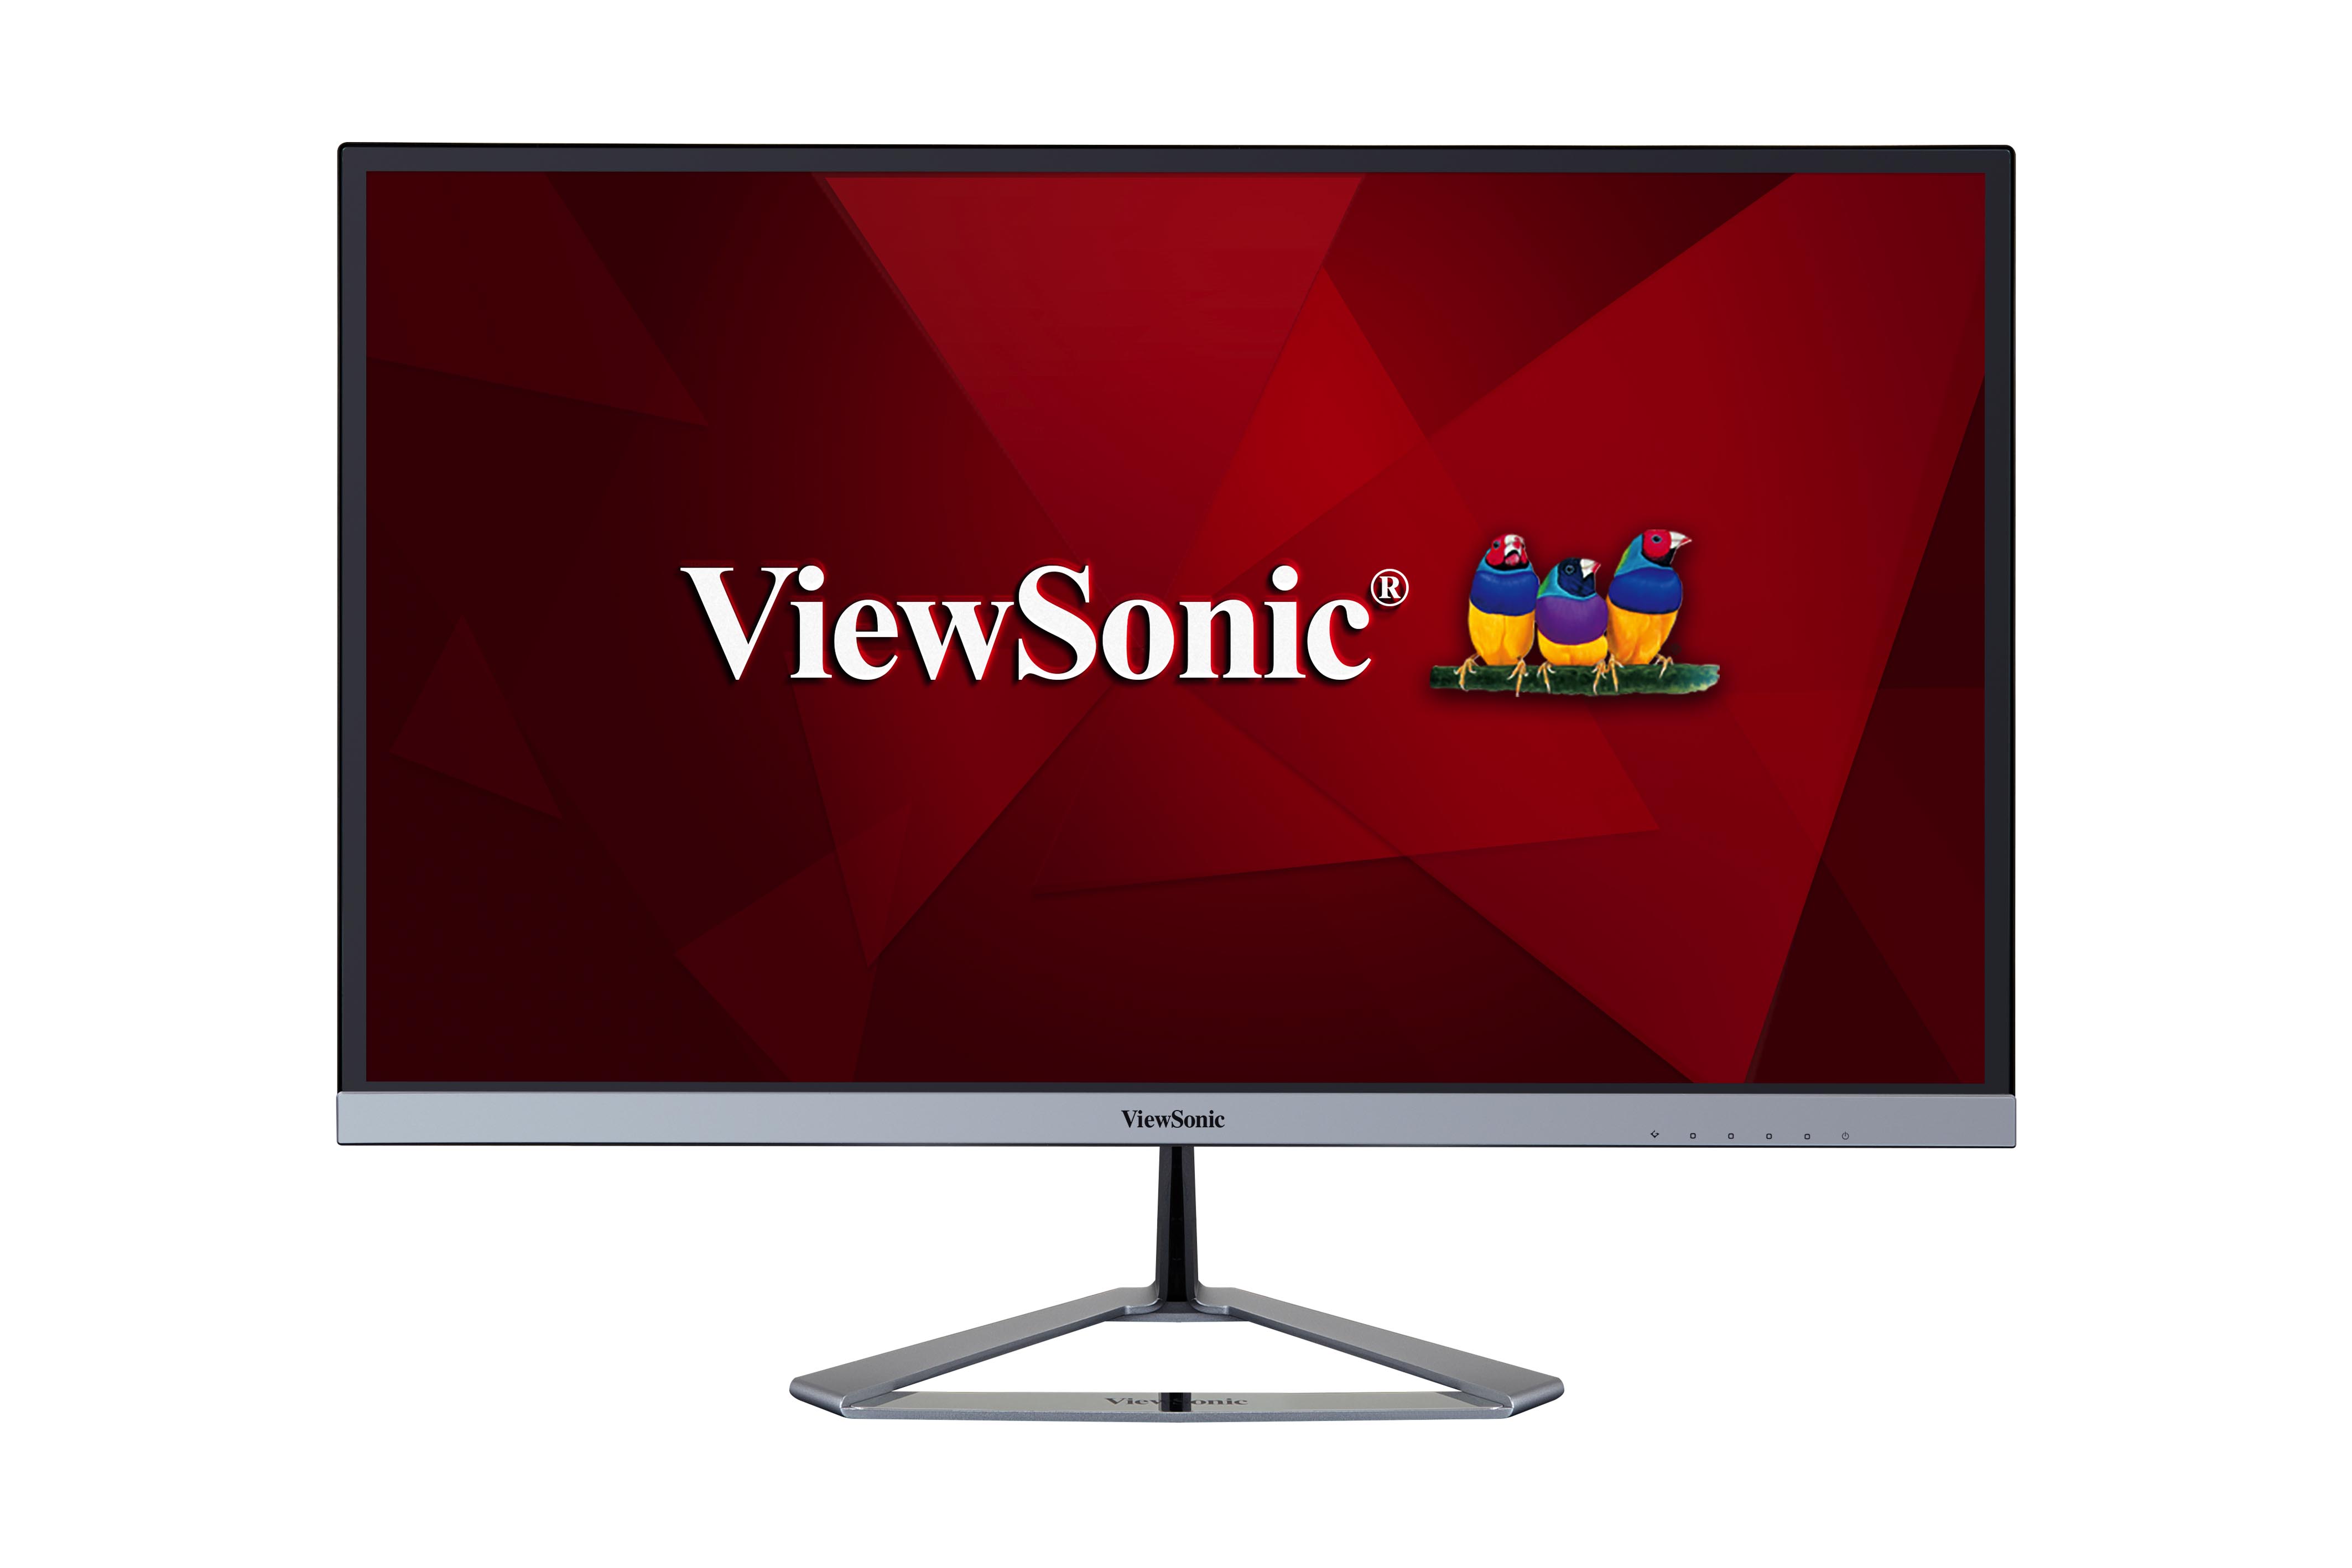 download viewsonic drivers for windows 10